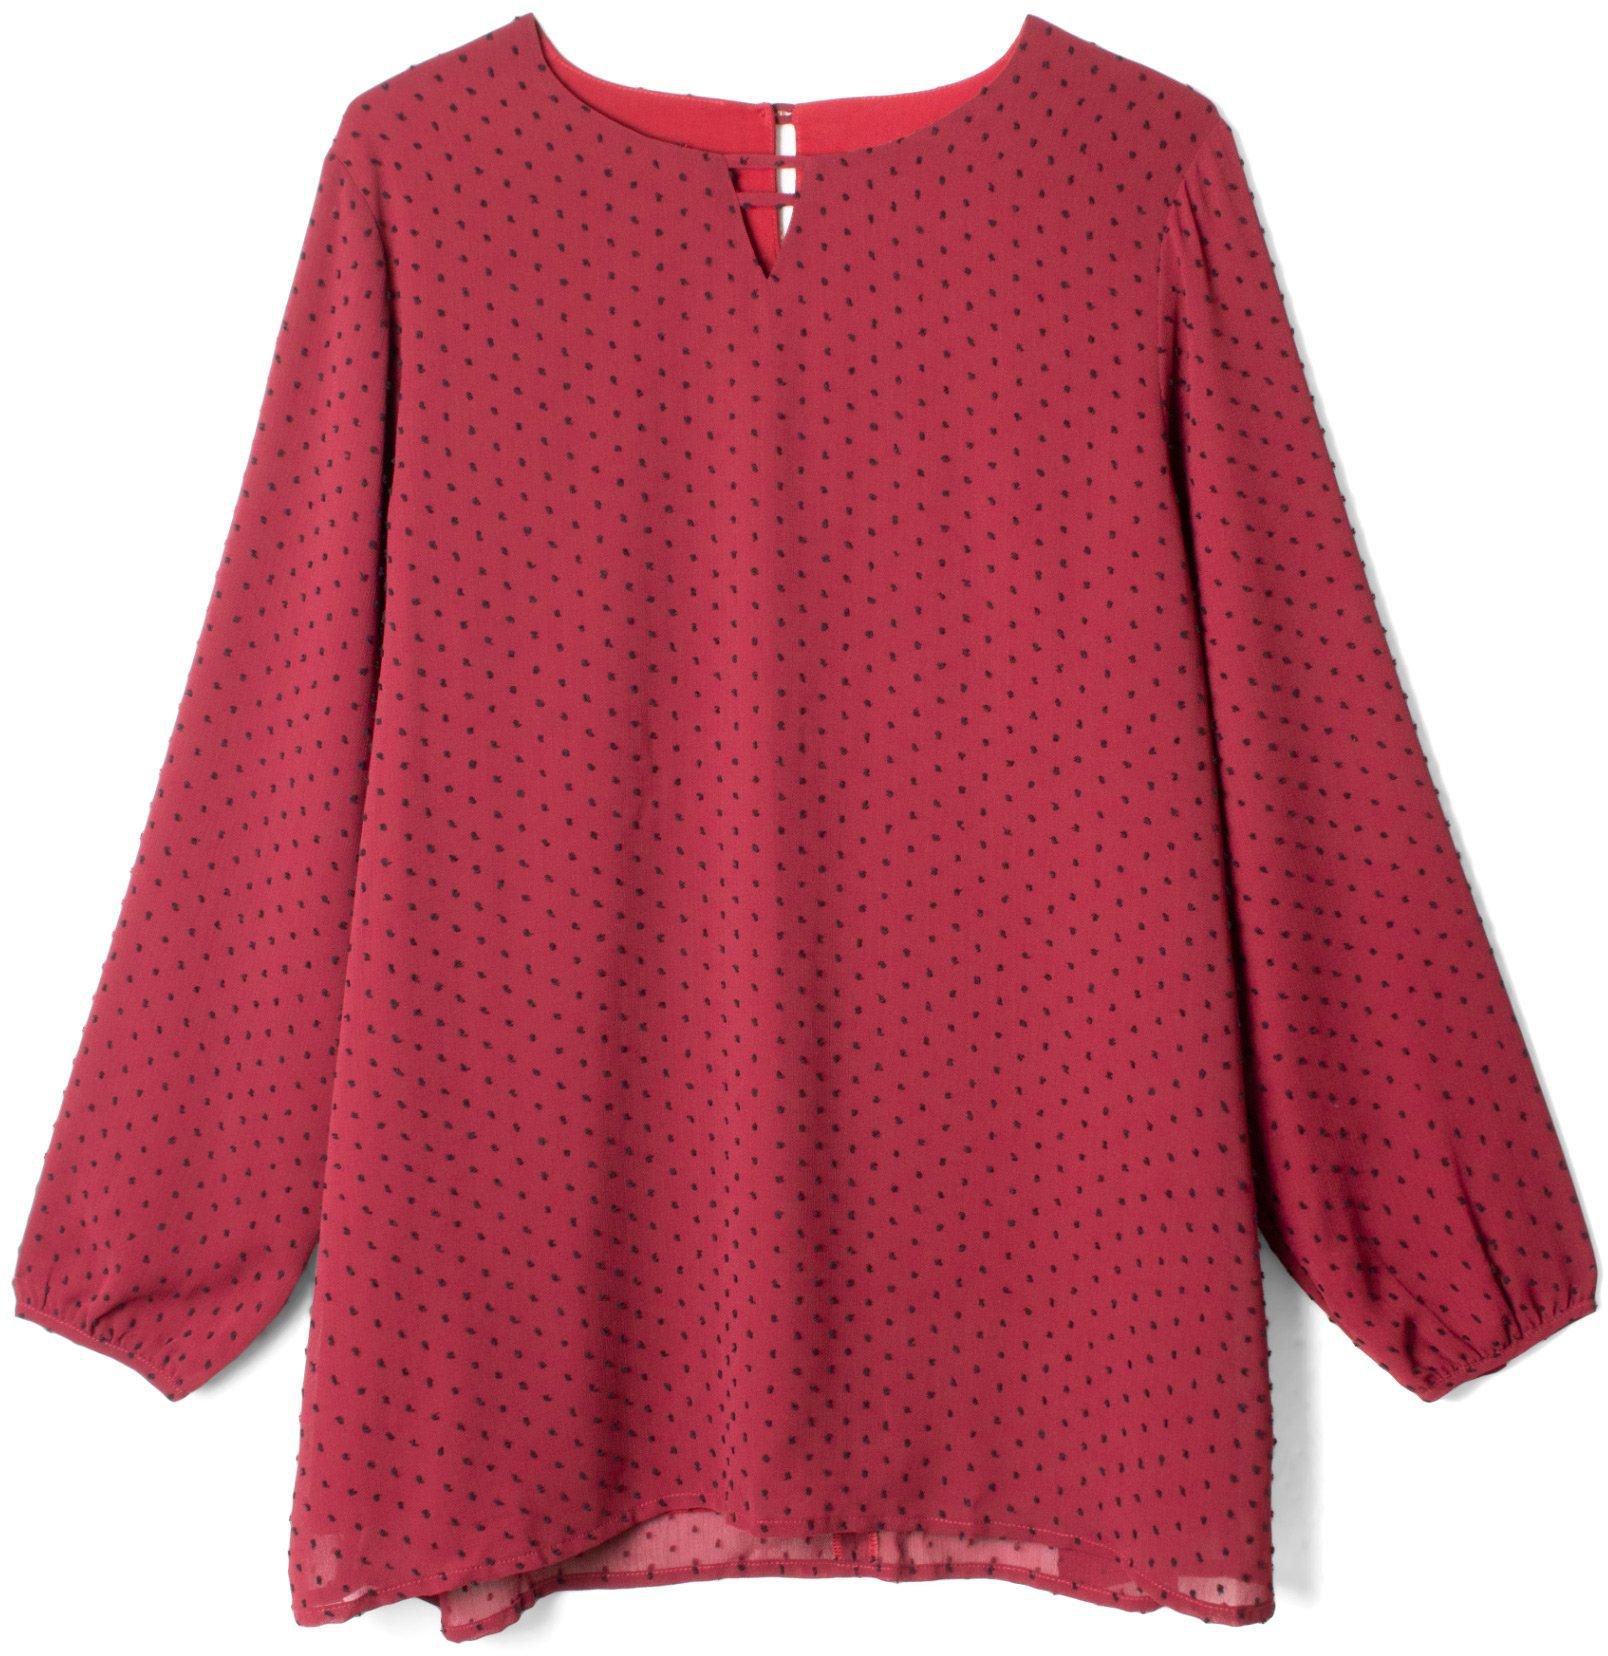 Puffed Sleeve Top Relaxed Fit - 6 Sizes (Maroon)